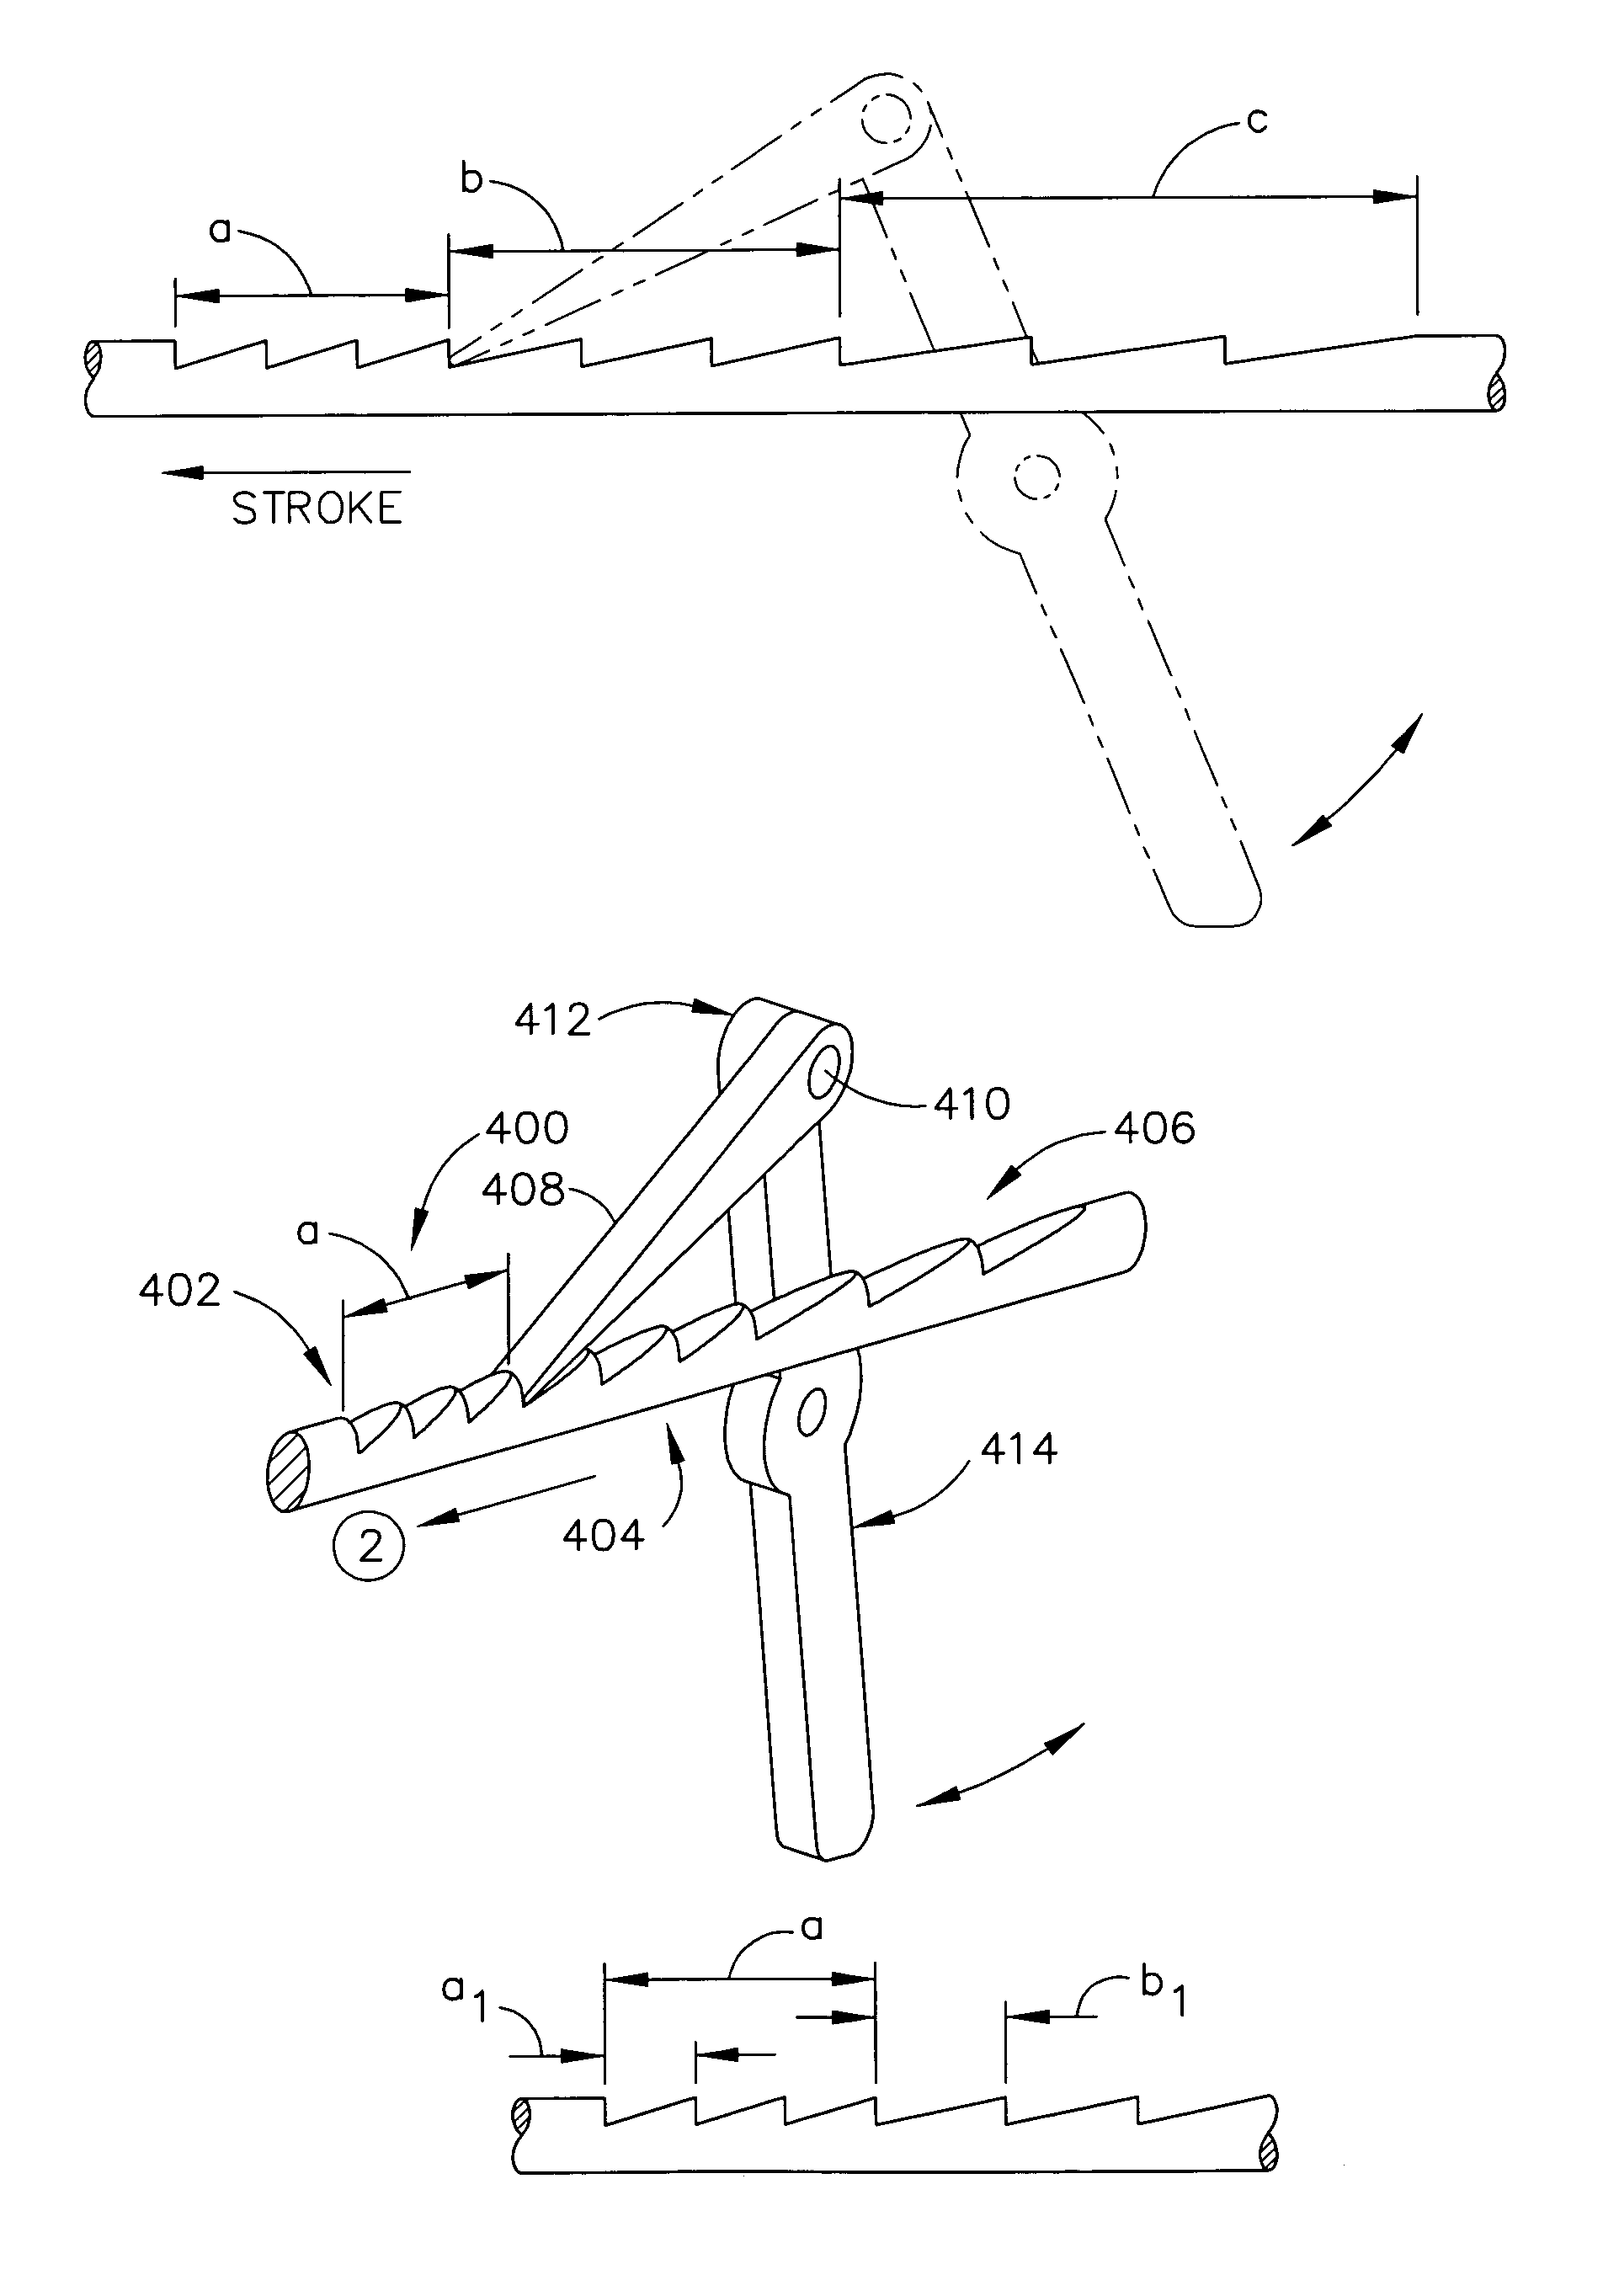 Surgical stapling instrument incorporating an uneven multistroke firing mechanism having a rotary transmission